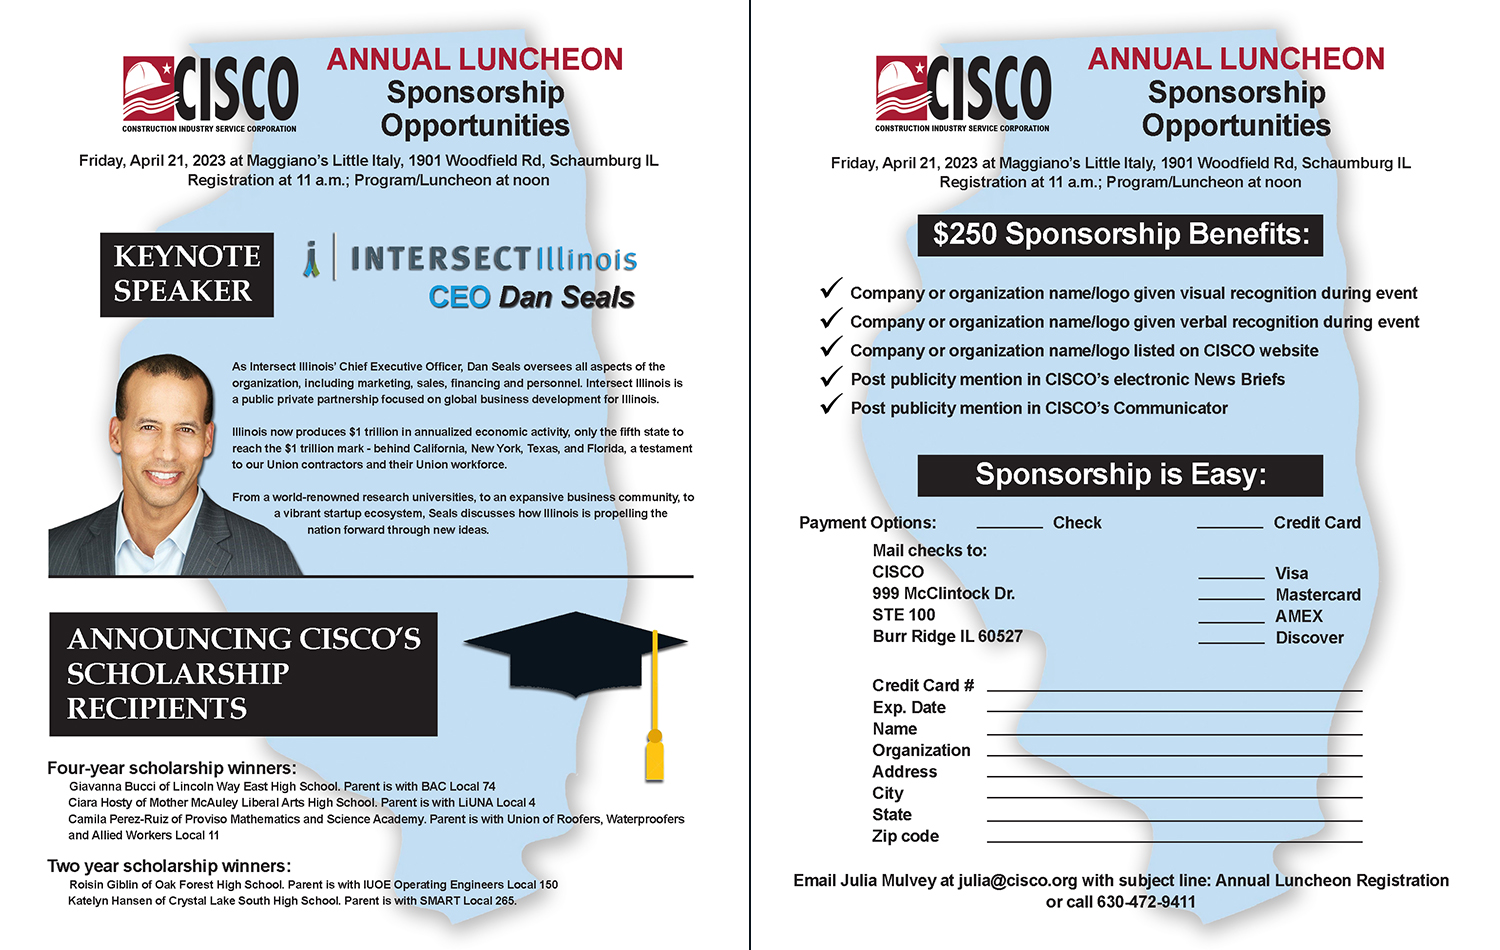 CISCO Annual Luncheon Sponsorship Opportunities